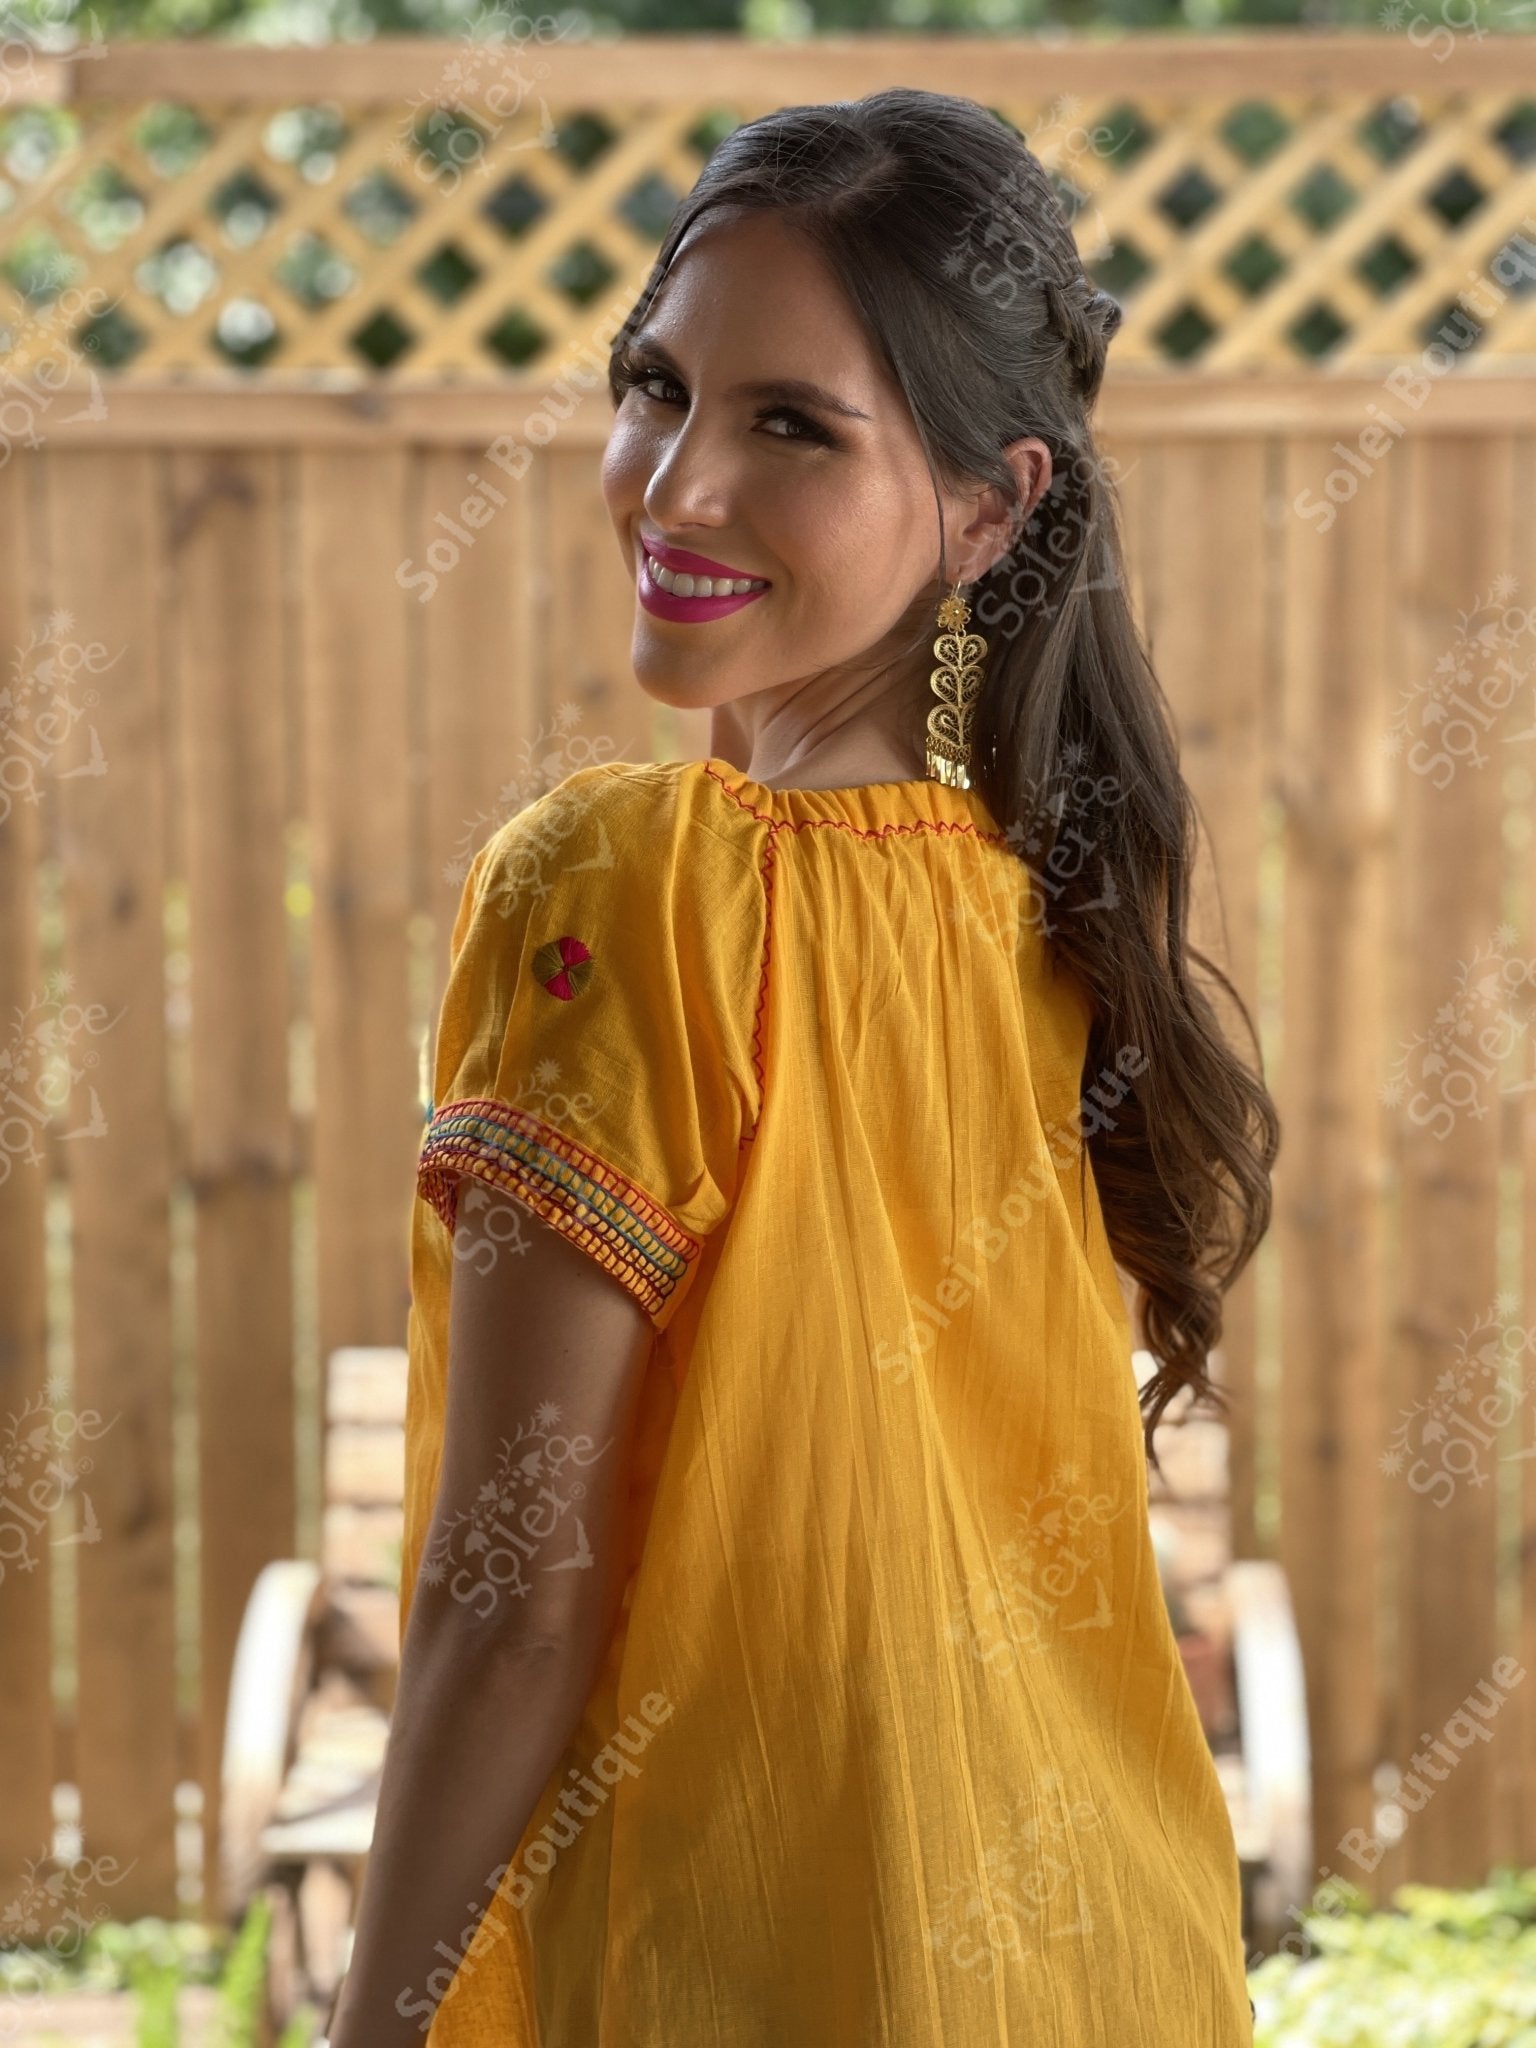 Ethnic Style Embroidered Mexican Patzcuaro Blouse - Solei Store